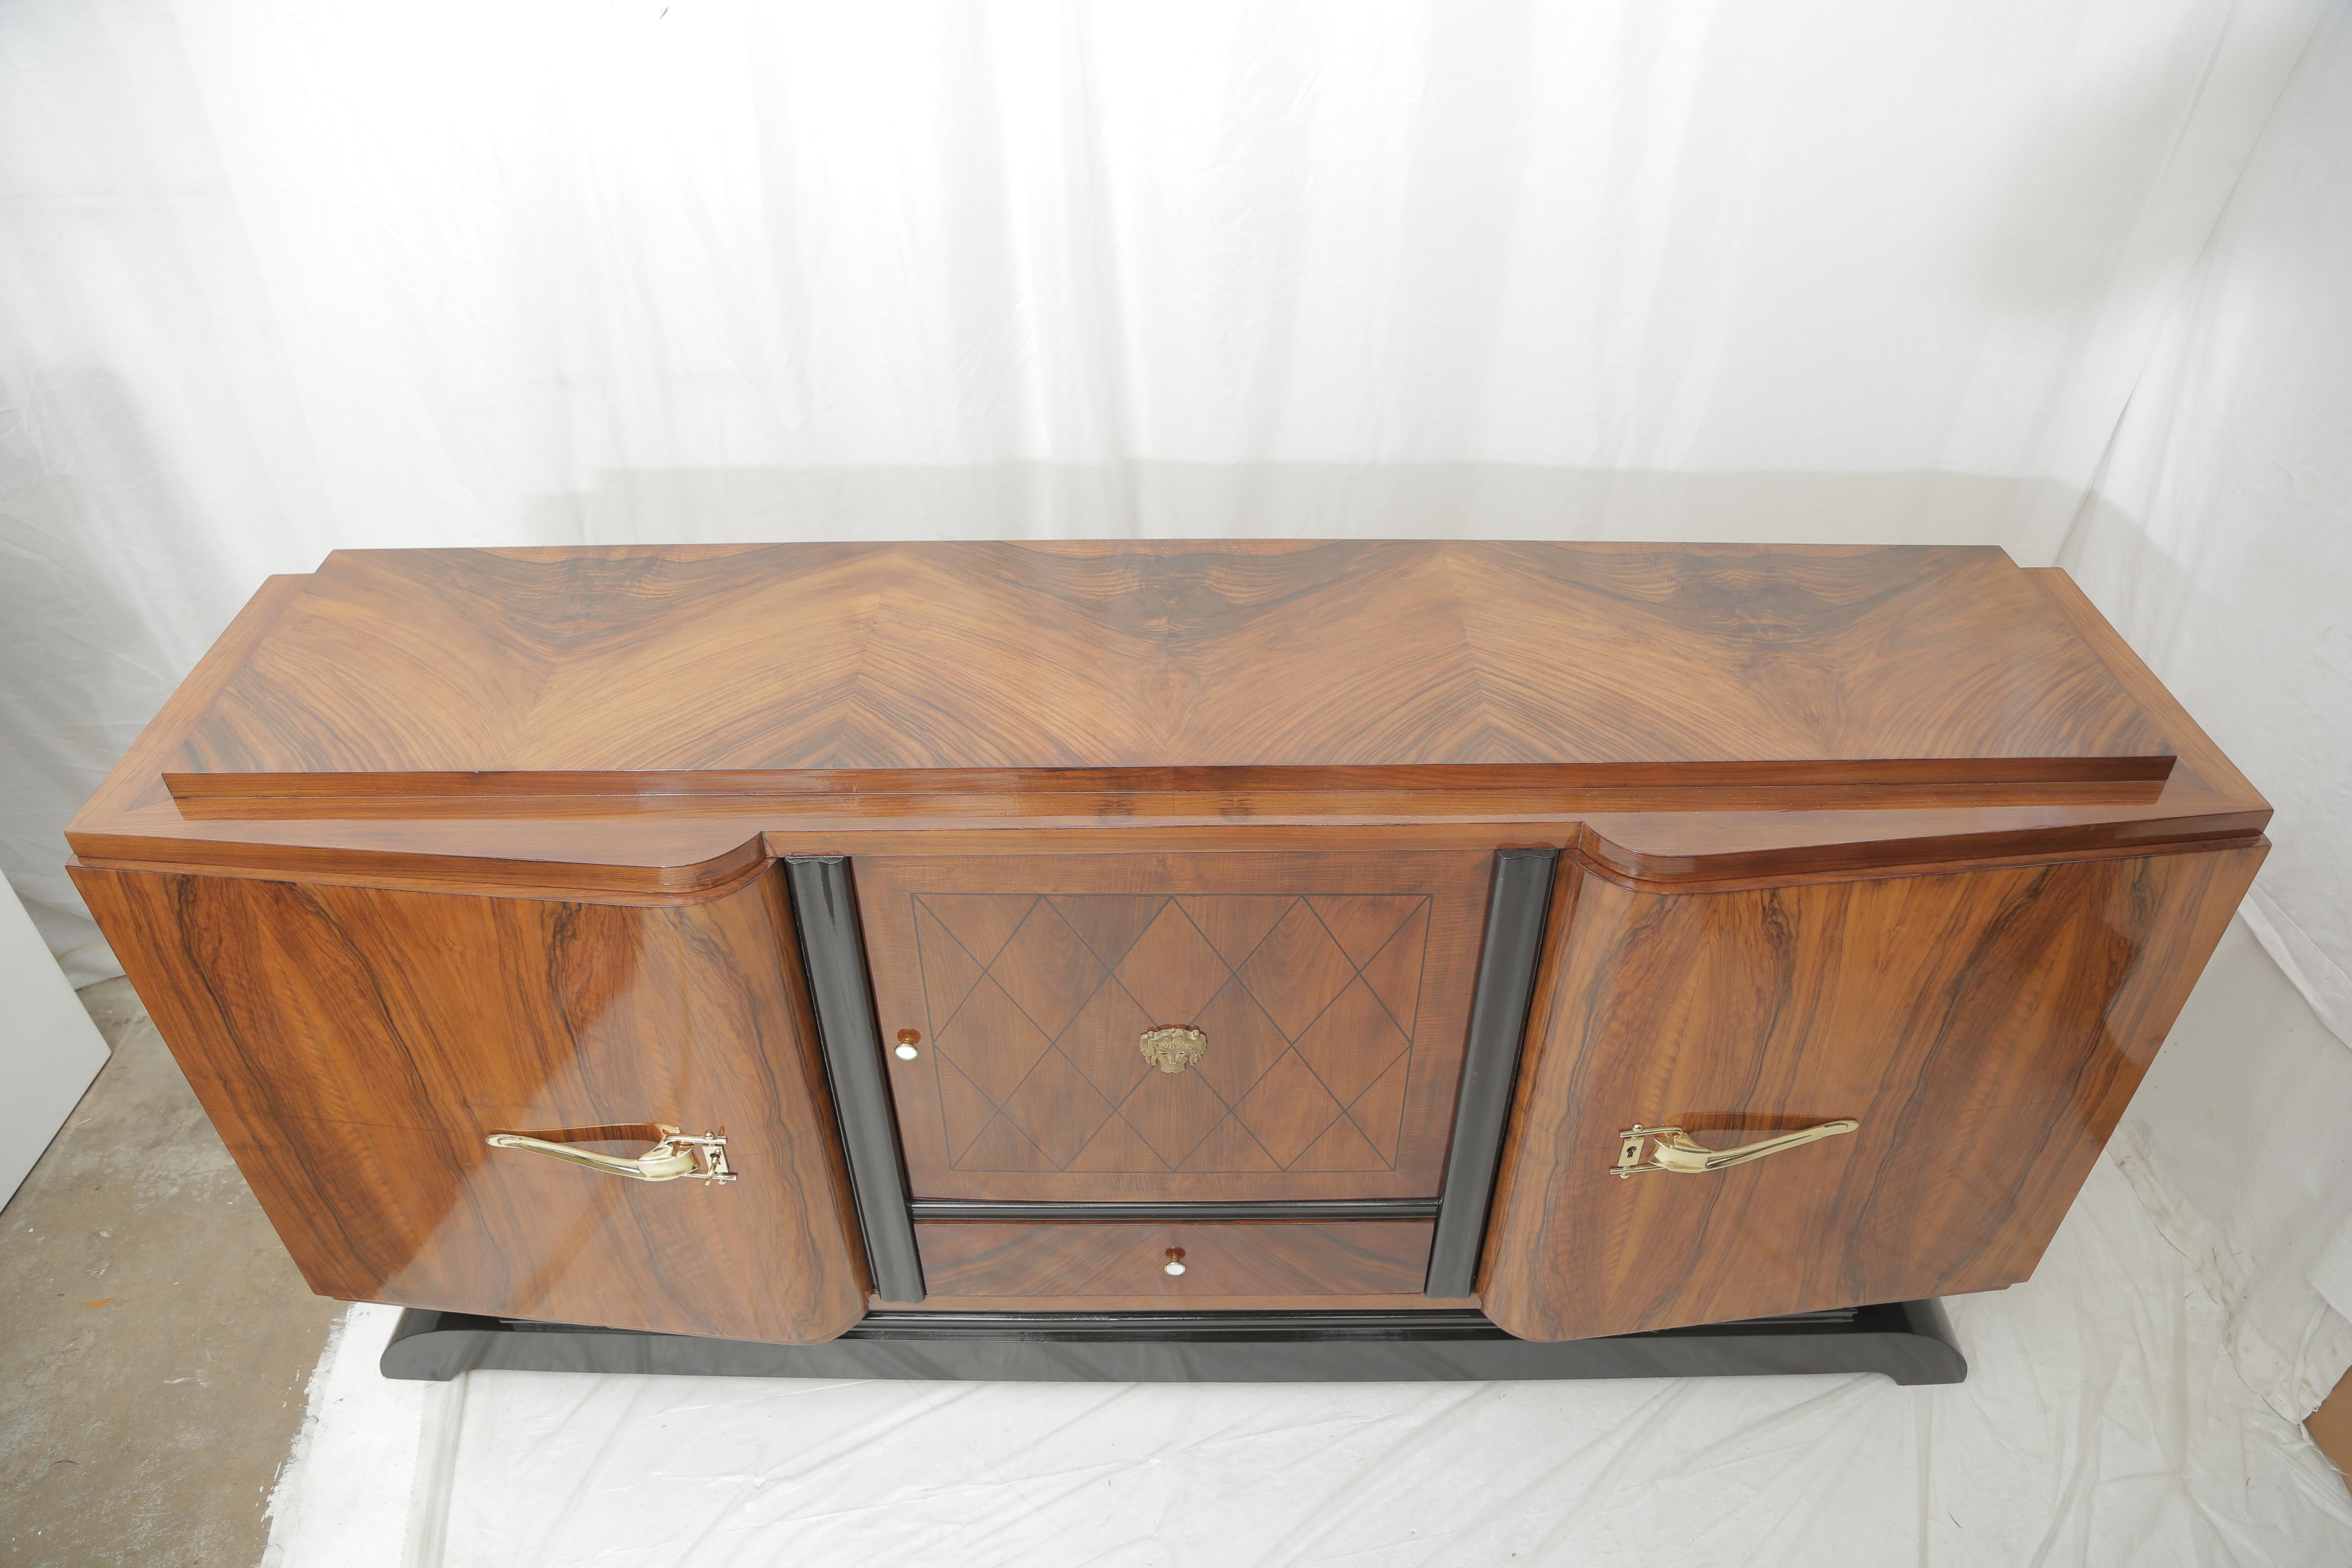 Elegant blond mahogany late Art Deco sideboard with three doors and one central drawer on the lower part, 1940s. Typical curved shapes for the two front doors
Sycamore veneer on the inside of the piece. The central door diamond shape ebony veneer